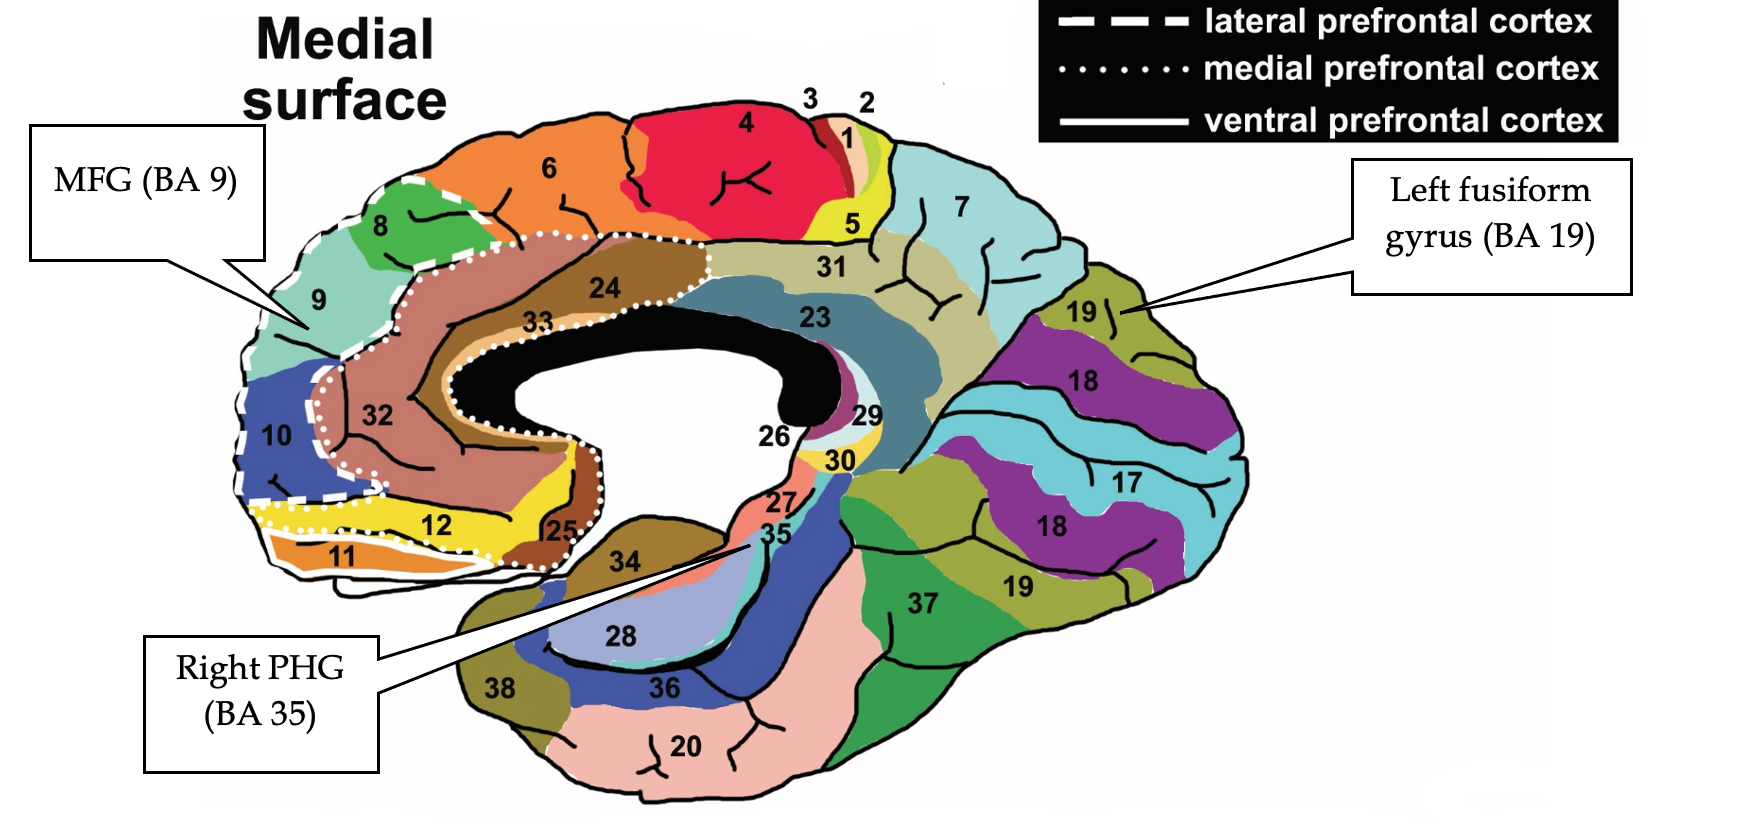 An illustration of a brain from a side view. there are 38 sections numbered and highlighted on this illustration. There are also three different outlines for three different cortexes. The lateral prefrontal cortex is outlined by a dashed white line. The medial prefrontal cortex is outlined by a dotted white line. The ventral prefrontal cortex is outlined by a solid white line. 3 of the 38 sections are emphasized in the image, they are: MFG (BA 9), Right PHG (BA 35), and Left fusiform gyrus (BA 19).